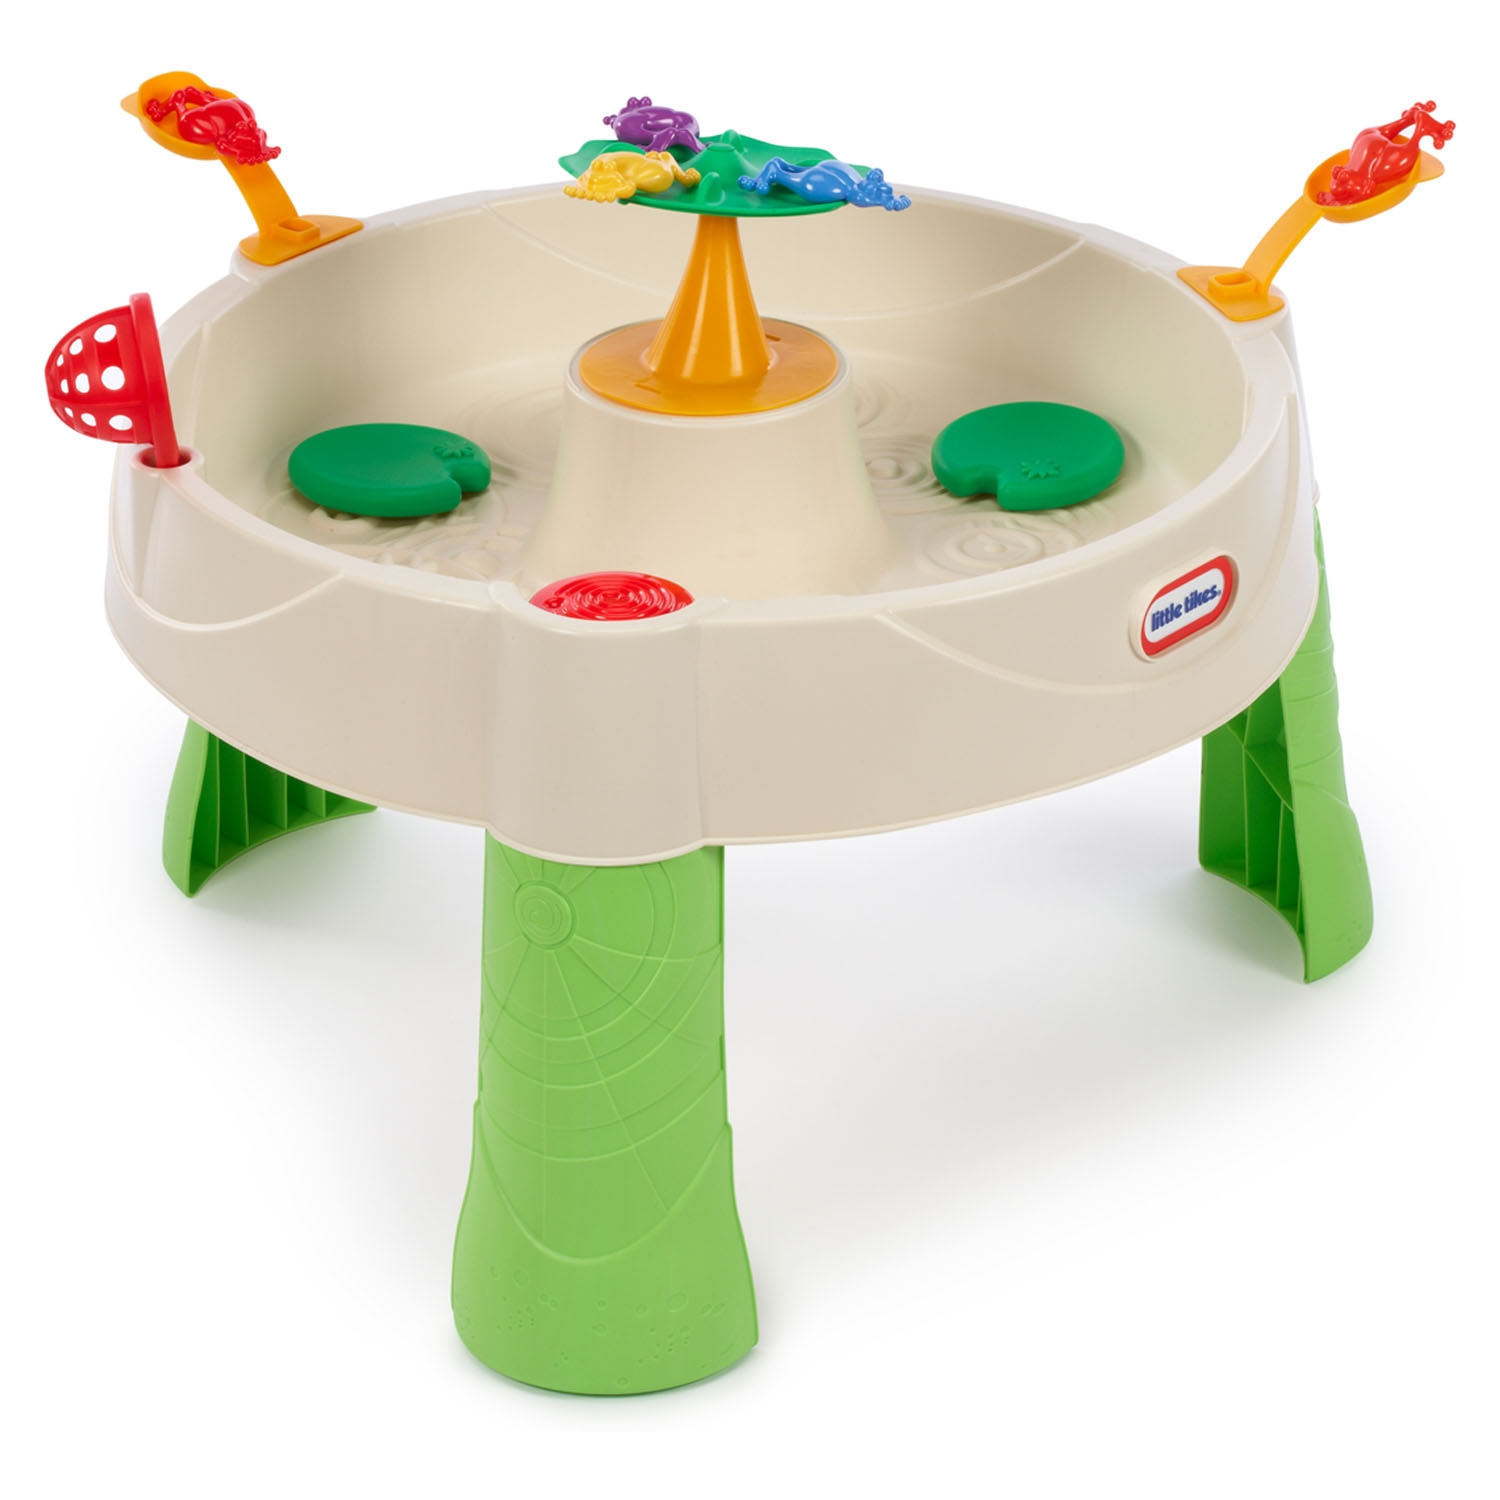 Little Tikes Frog Pond Water Table - image 3 of 6